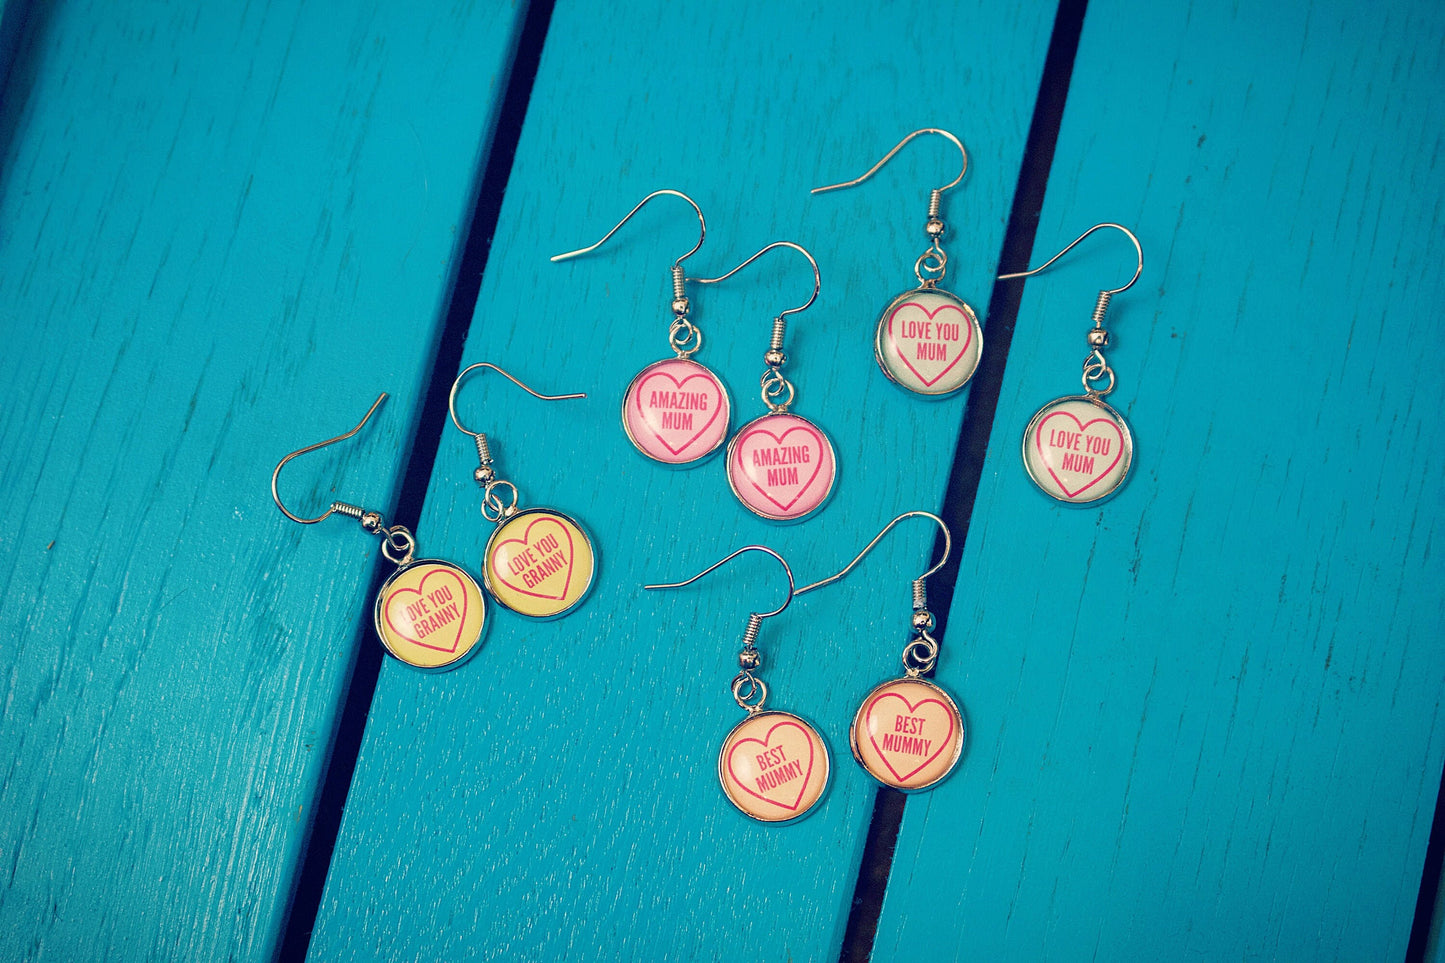 Mothers Day Love Hearts Earrings. Love You Mum! Amazing Mum! Gift for Granny. Grandmother. Retro sweets. Sweeties. Personalised message